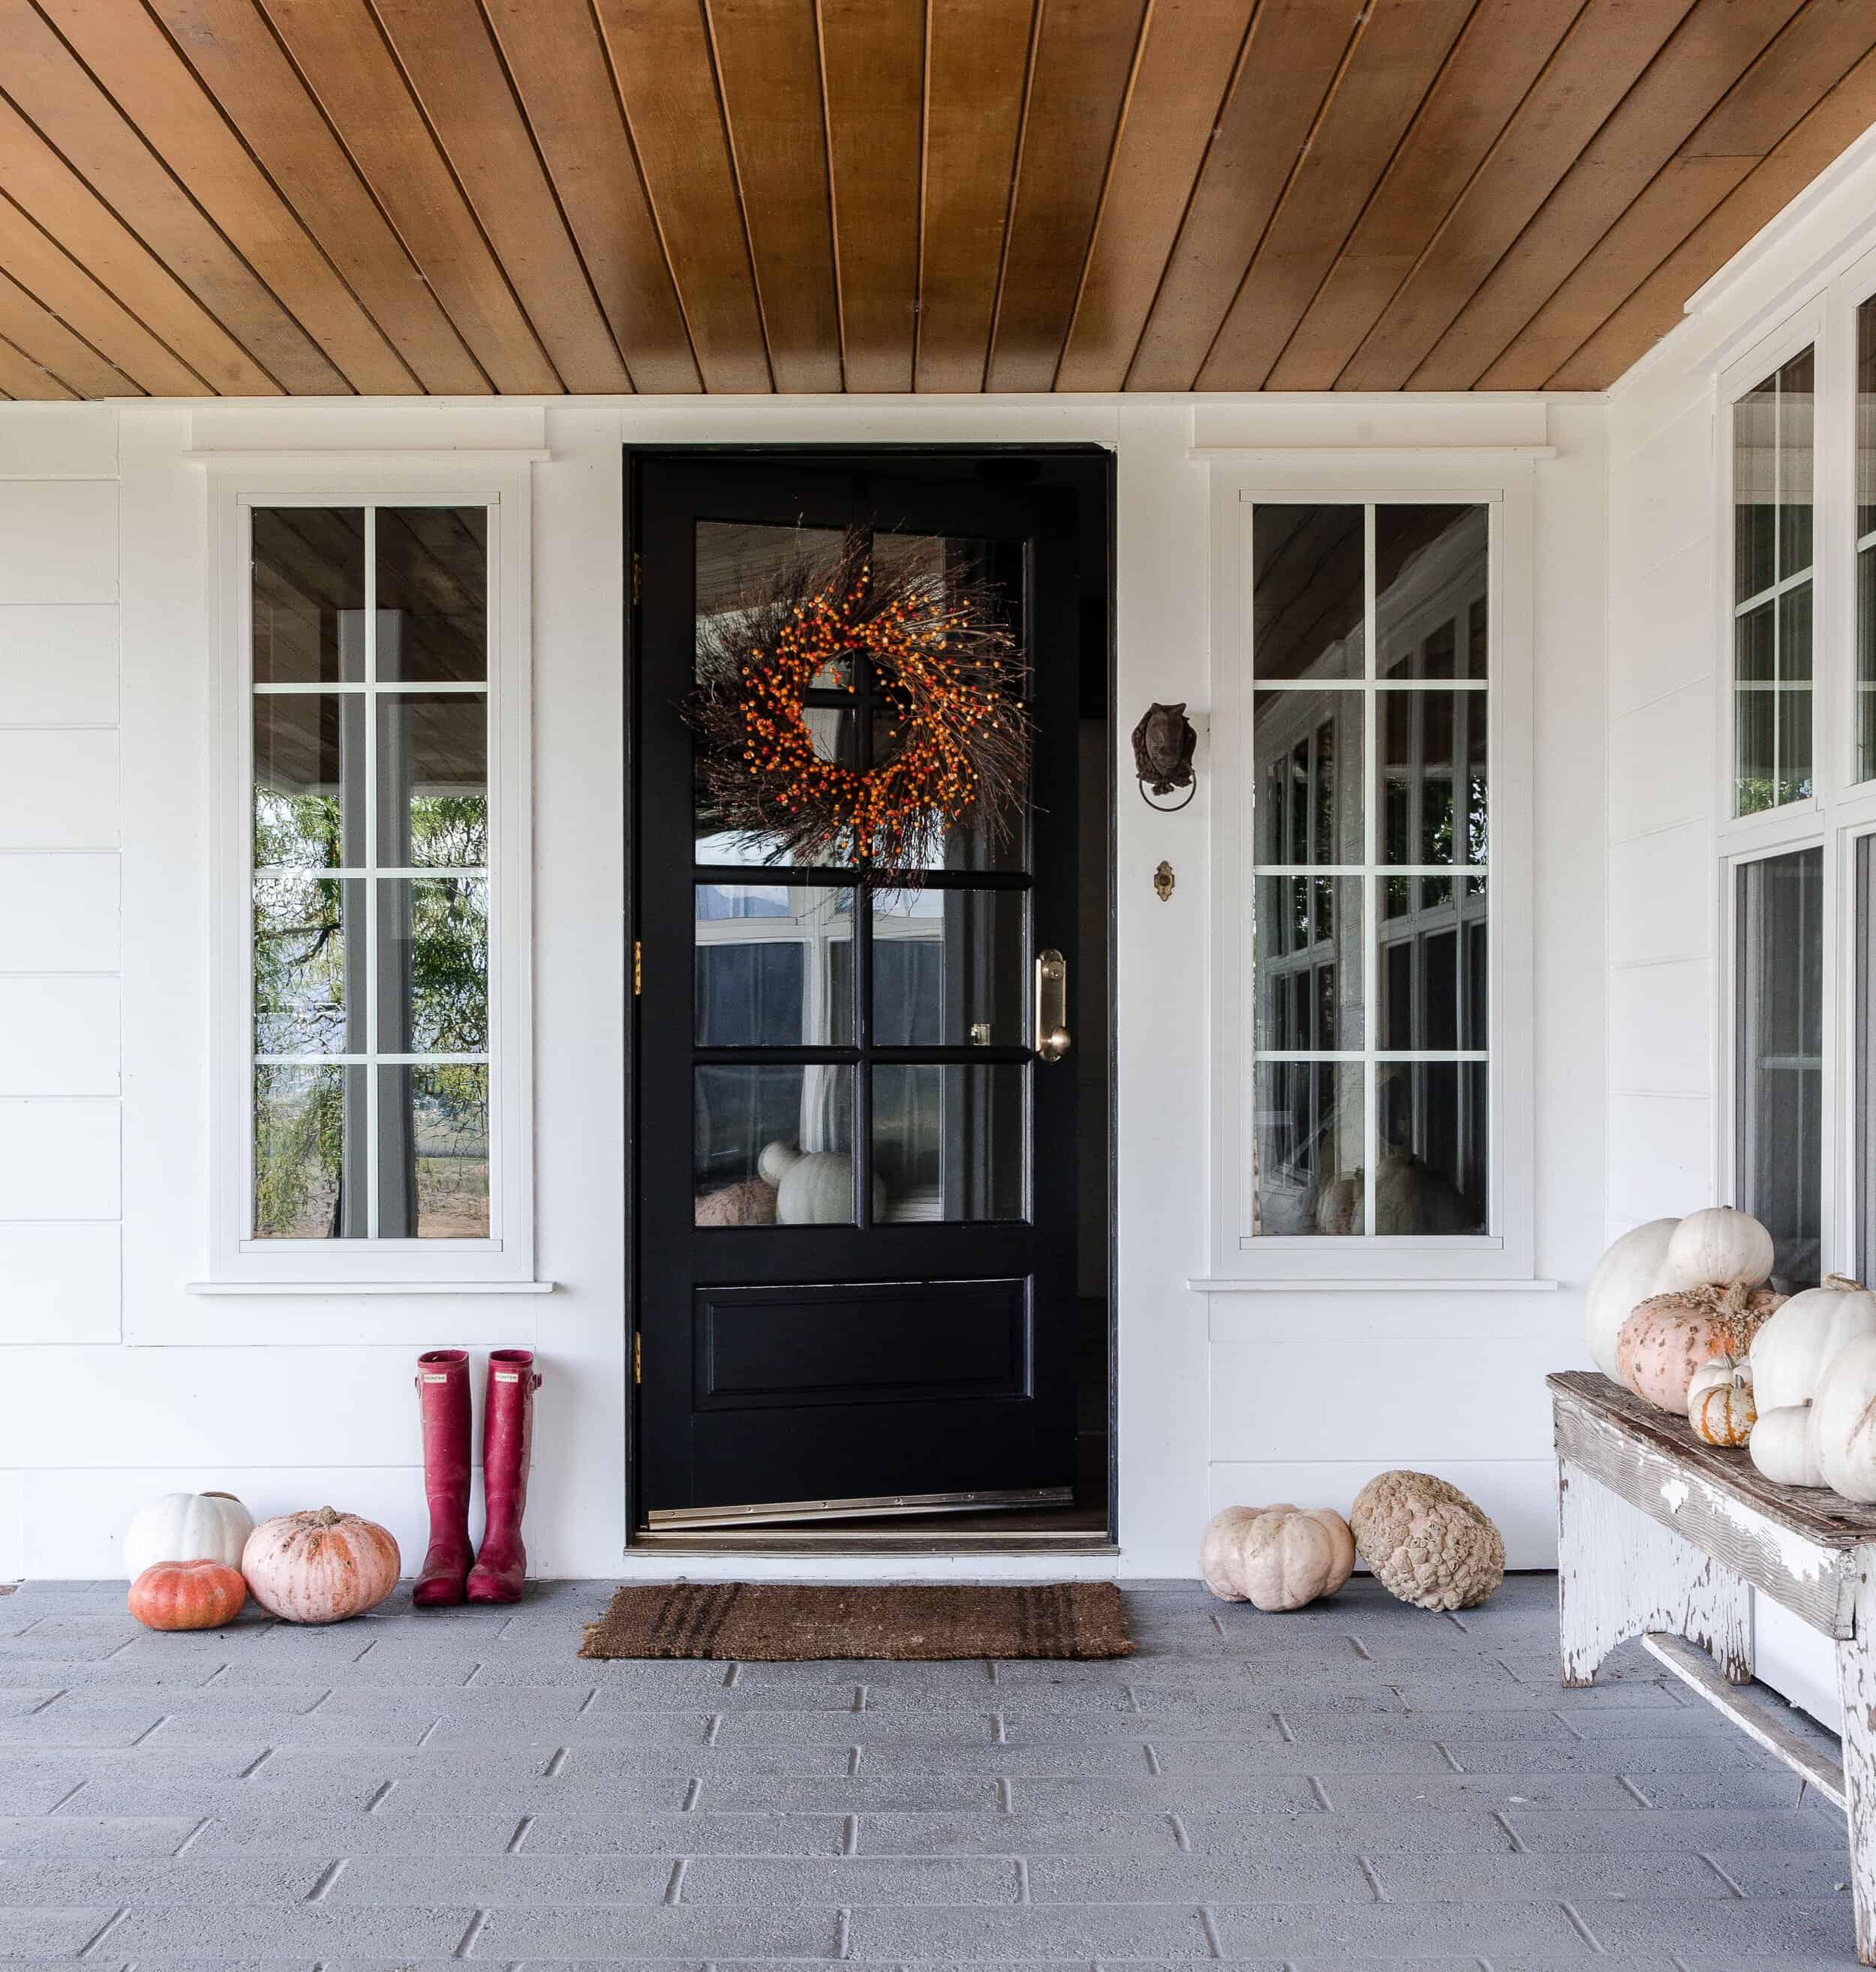 Fall is officially here, so it’s safe to break out that fall porch decor! Get inspired to decorate for fall with these simple decorating ideas! 